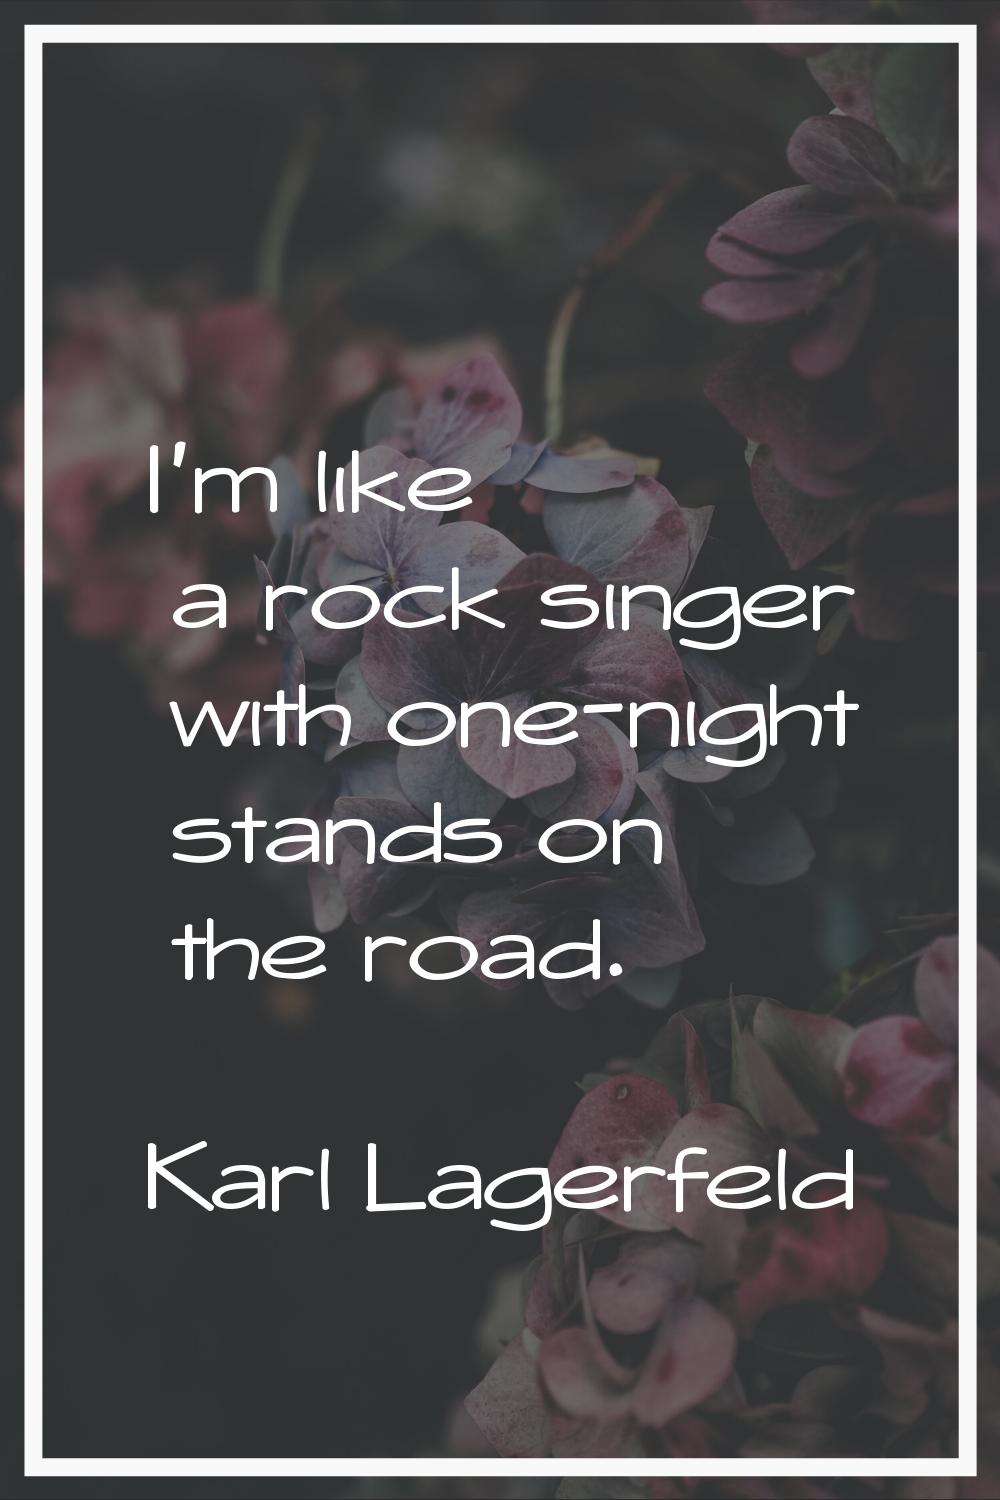 I'm like a rock singer with one-night stands on the road.